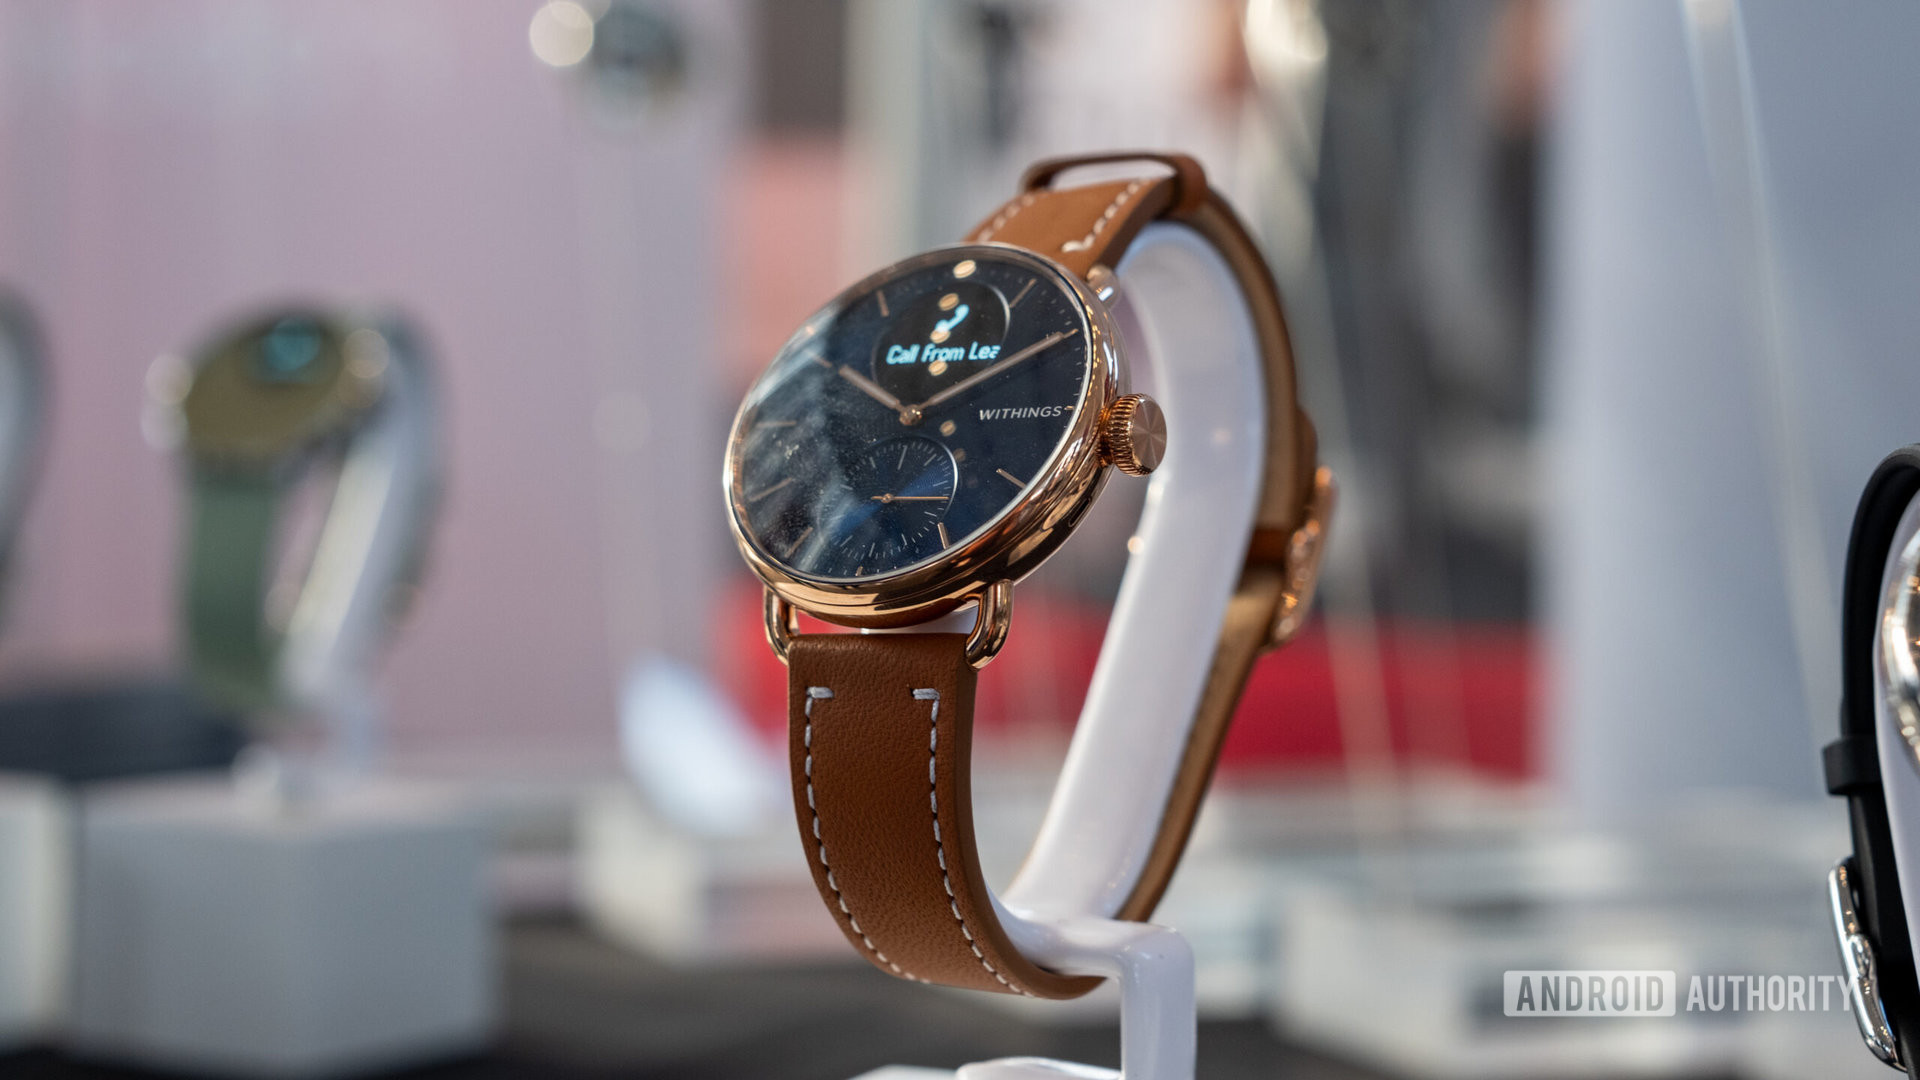 Withings Scanwatch 2 on a watch stand with brown leather strap